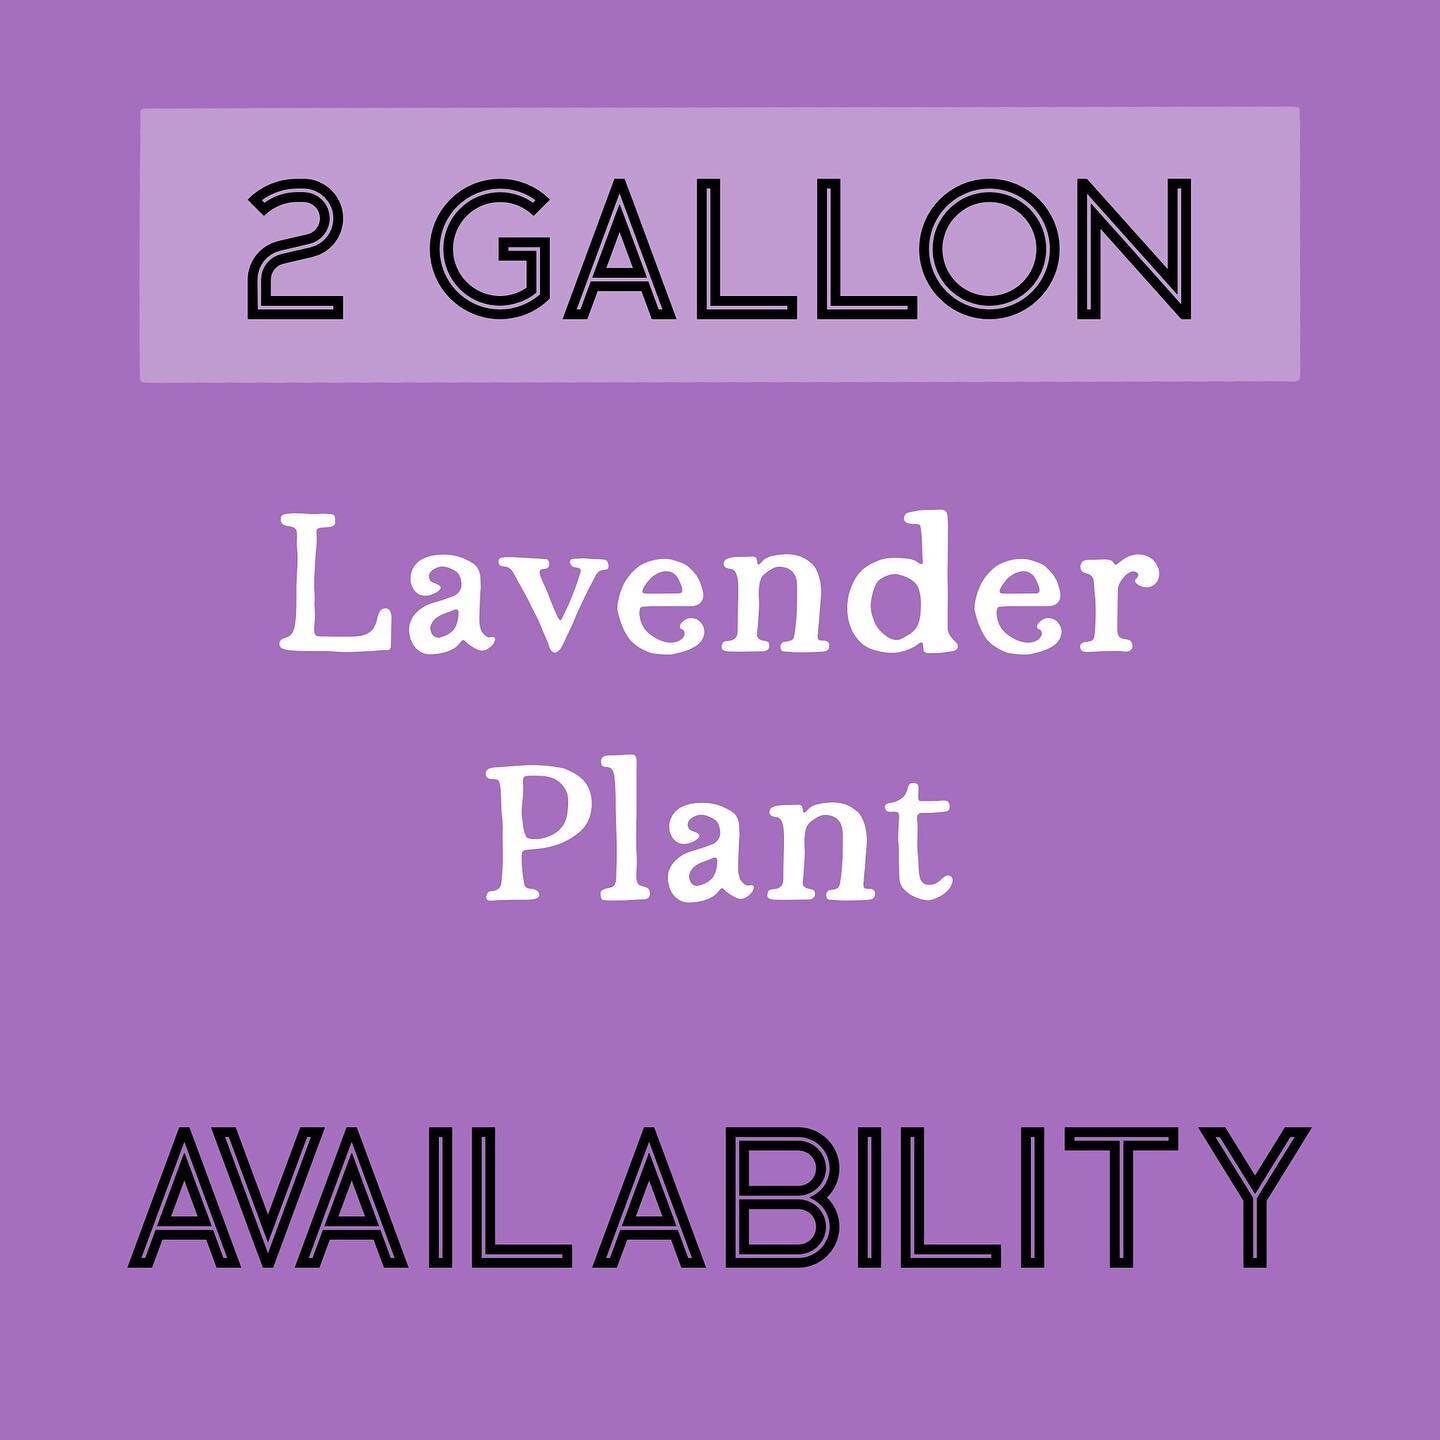 *** 2  G A L L O N ***
Lavender Plant Availability
(Availability only at Camas Plant &amp; Garden Fair Saturday May 13)
🌿Prices will be listed at plant sale!
👉🏽Cannot ship live plants
💜Please visit our website for description of each variety! (Li